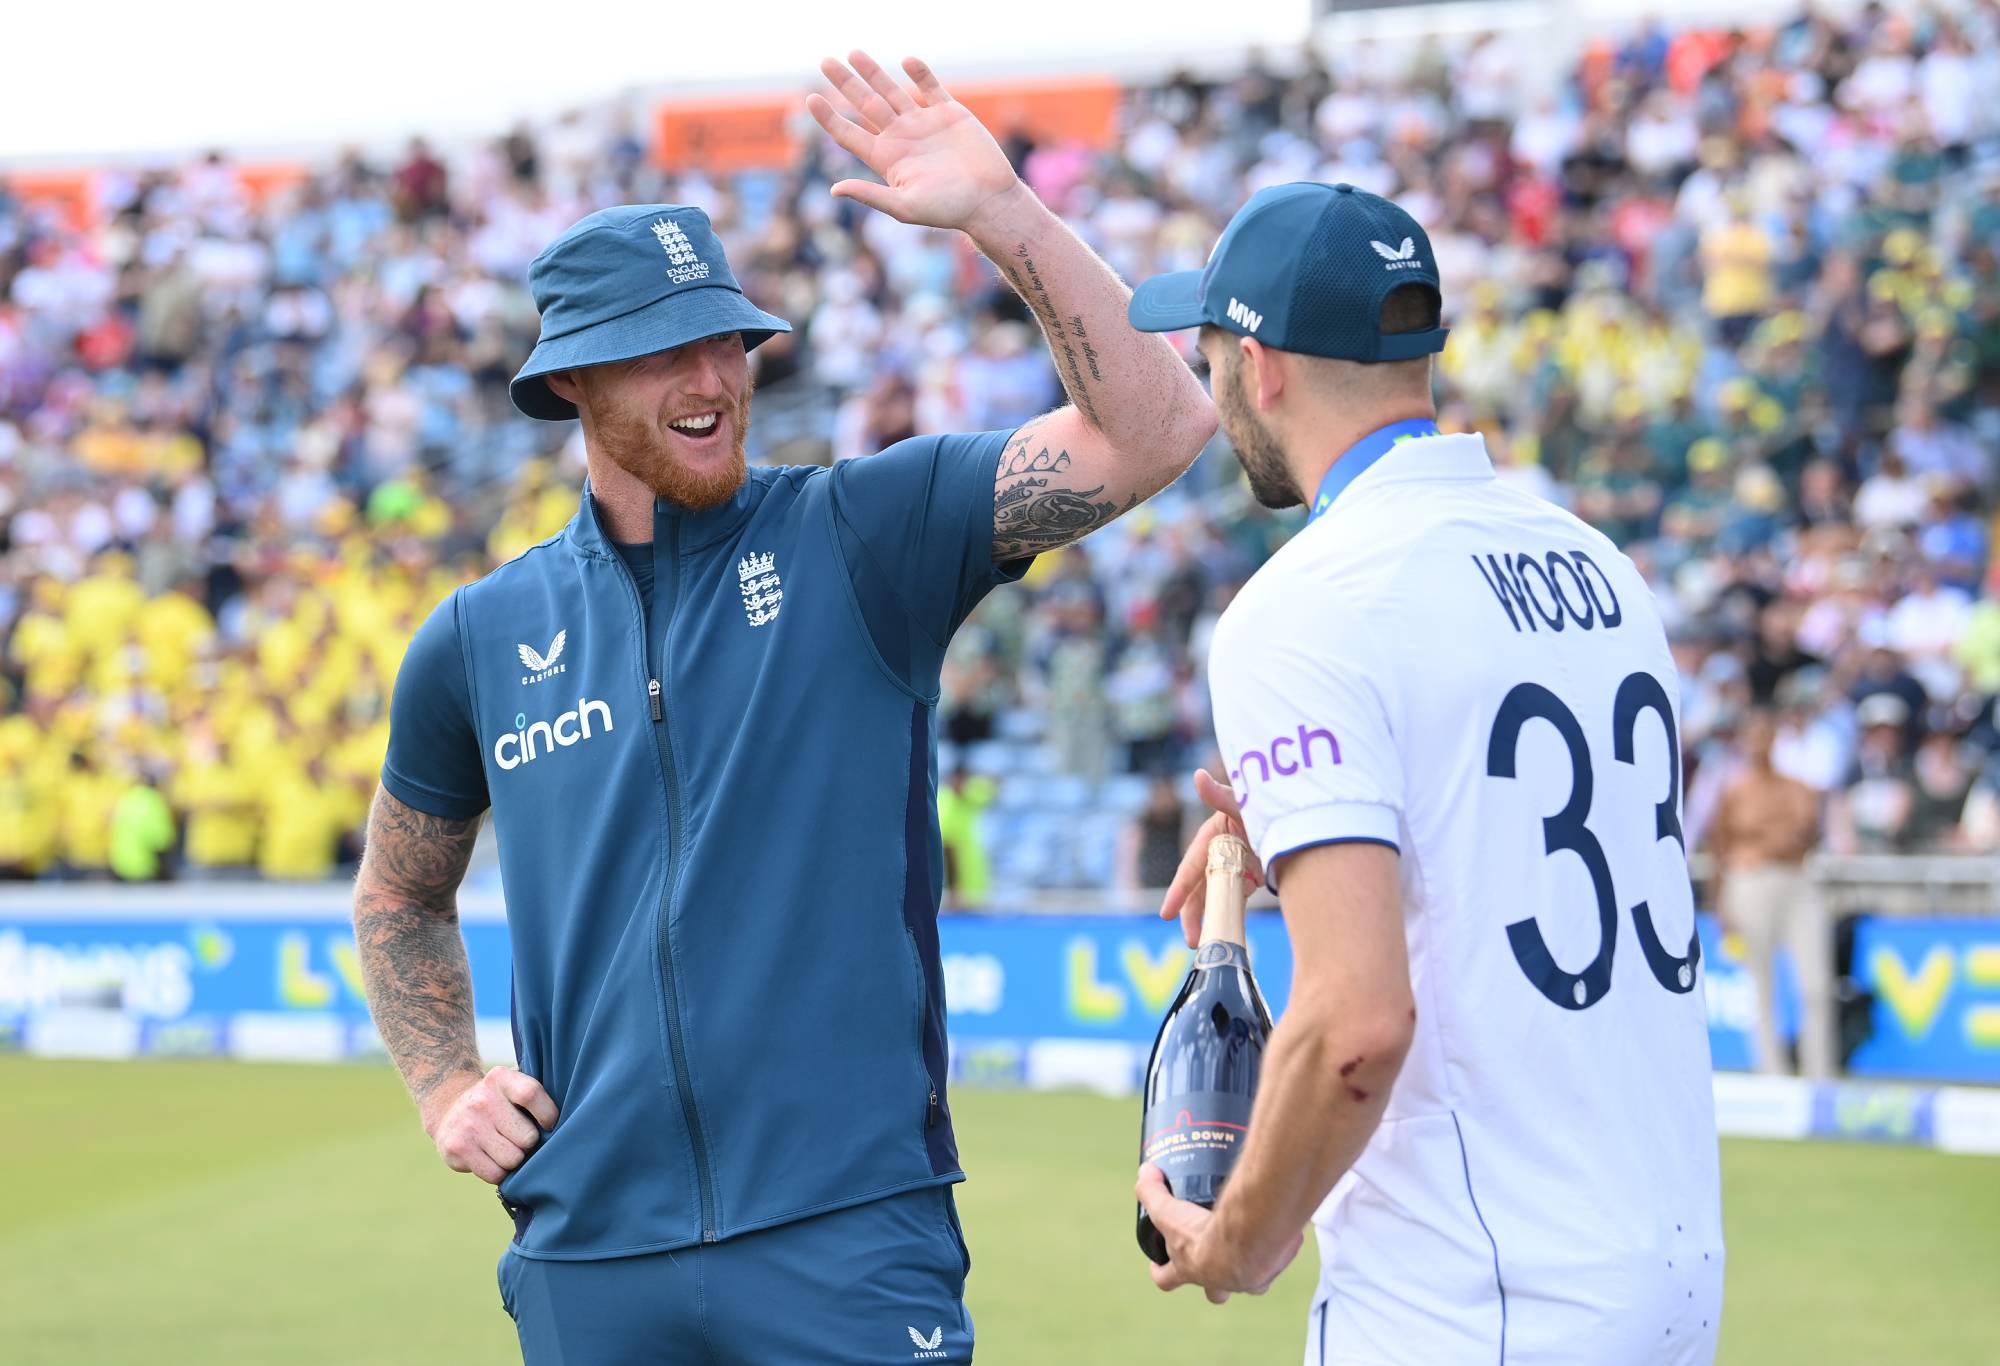 LEEDS, ENGLAND - JULY 09: Player of the match Mark Wood with England captain Ben Stokes after day four of the 3rd LV= Ashes Test Match at Headingley on July 09, 2023 in Leeds, England. (Photo by Stu Forster/2023 Getty Images)